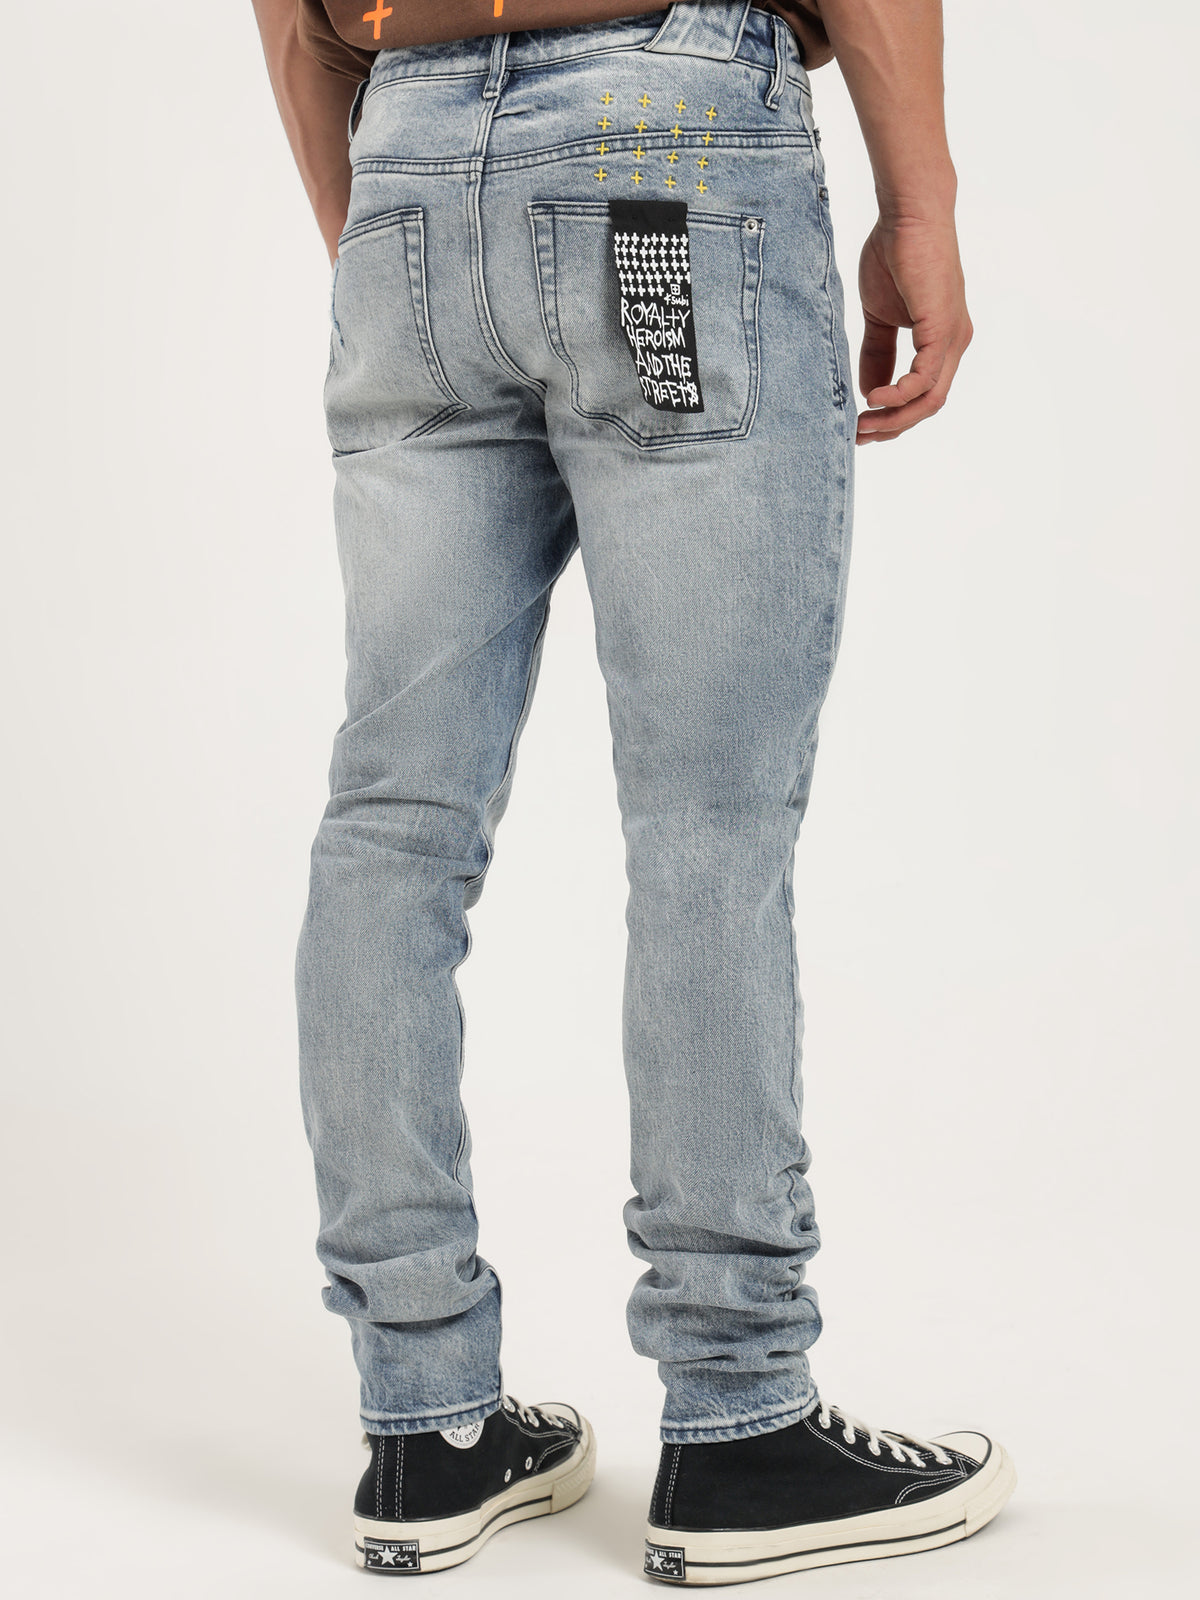 Chitch Slim Fit Jeans in Spray Out Yellow